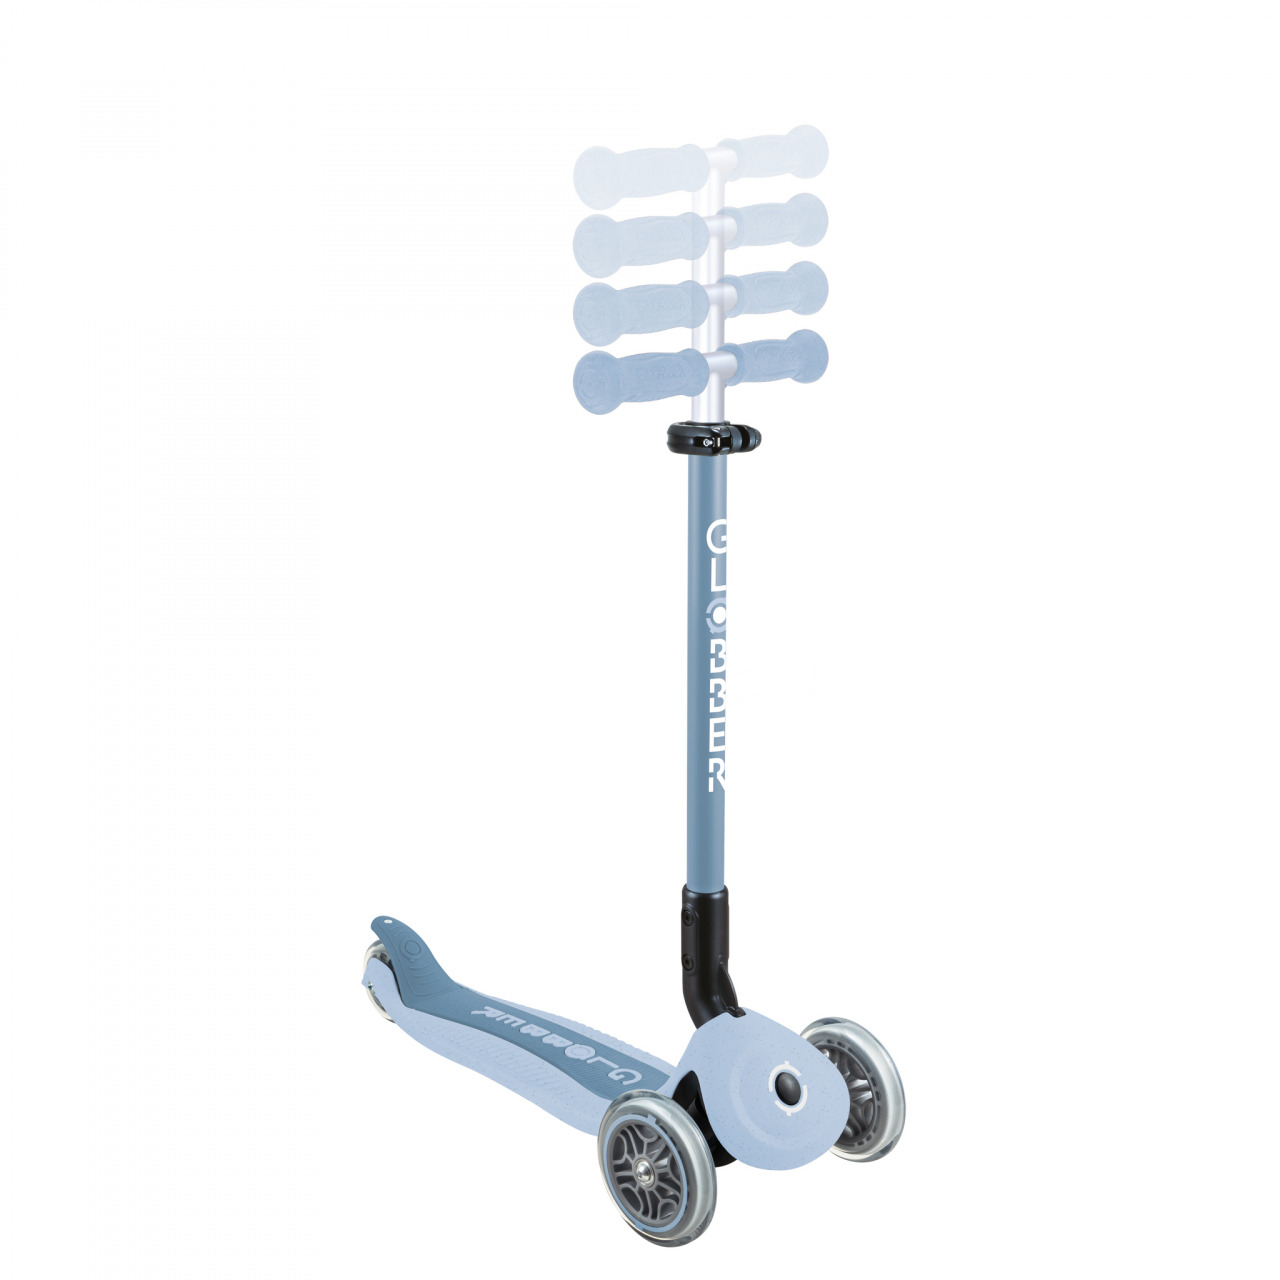 740 501 Adjustable Eco Scooter